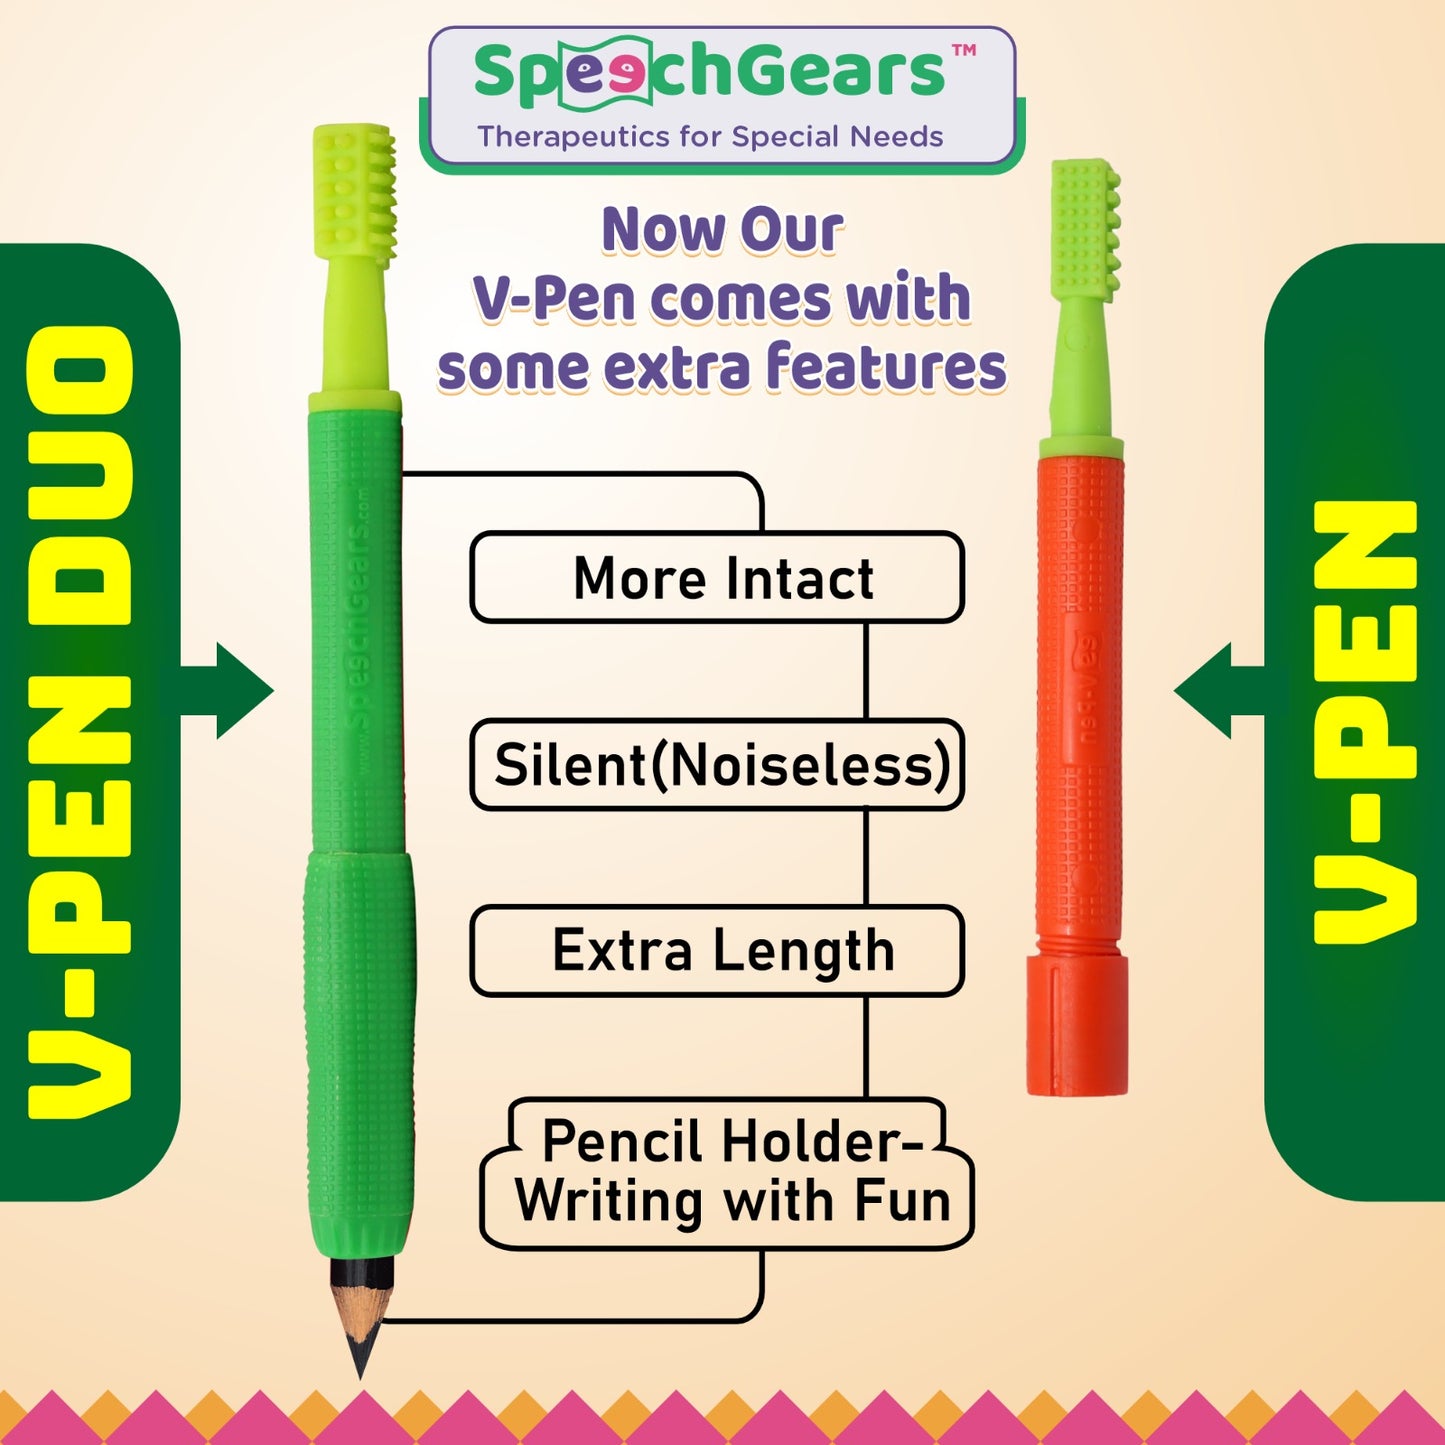 V-Pen comes with some extra features clarity of speech